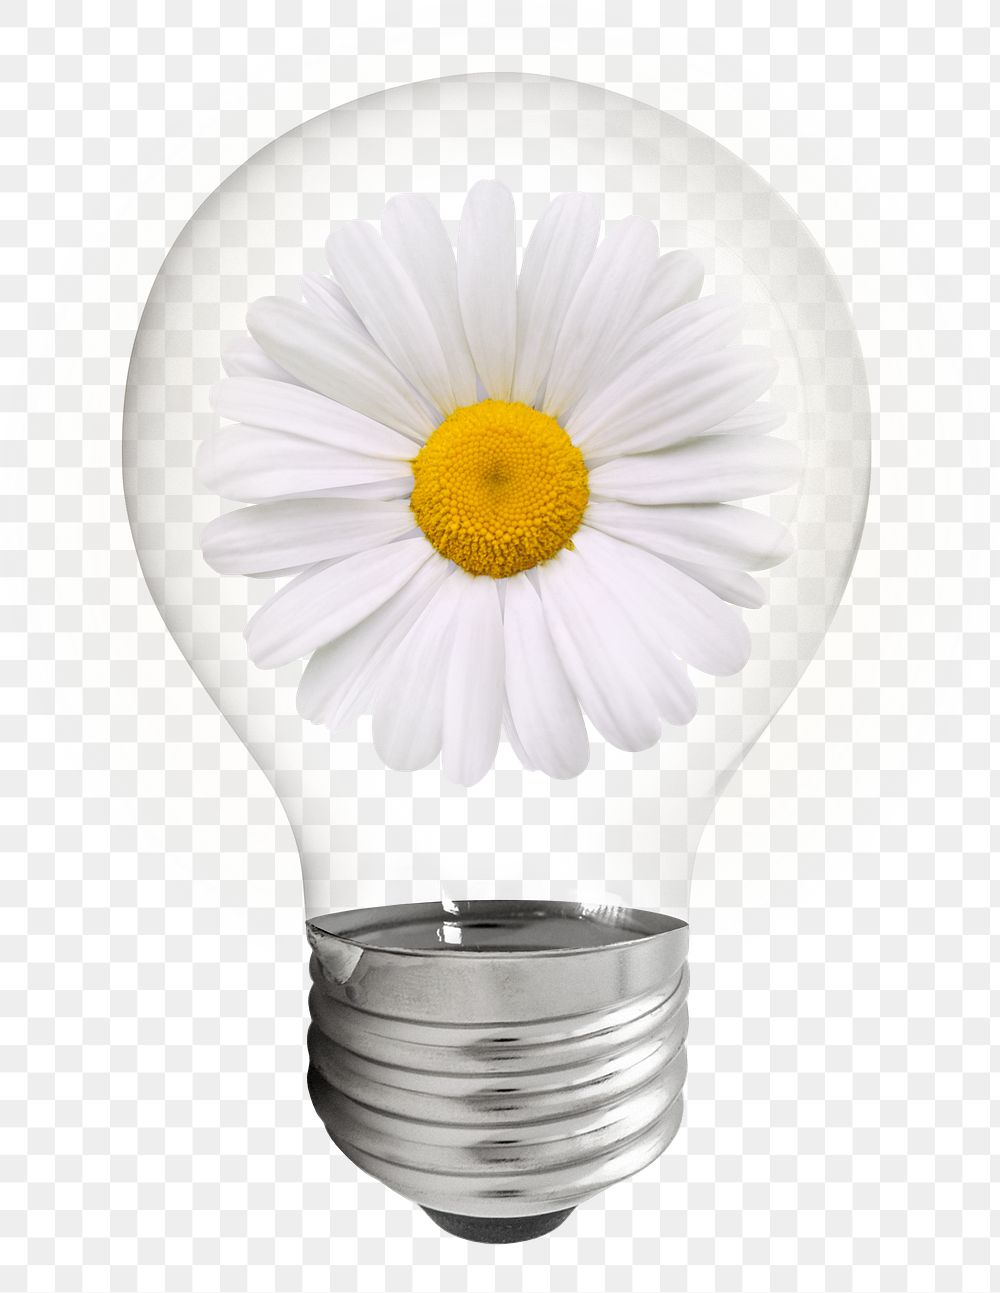 Daisy flower png sticker light bulb, Spring aesthetic graphic, transparent background